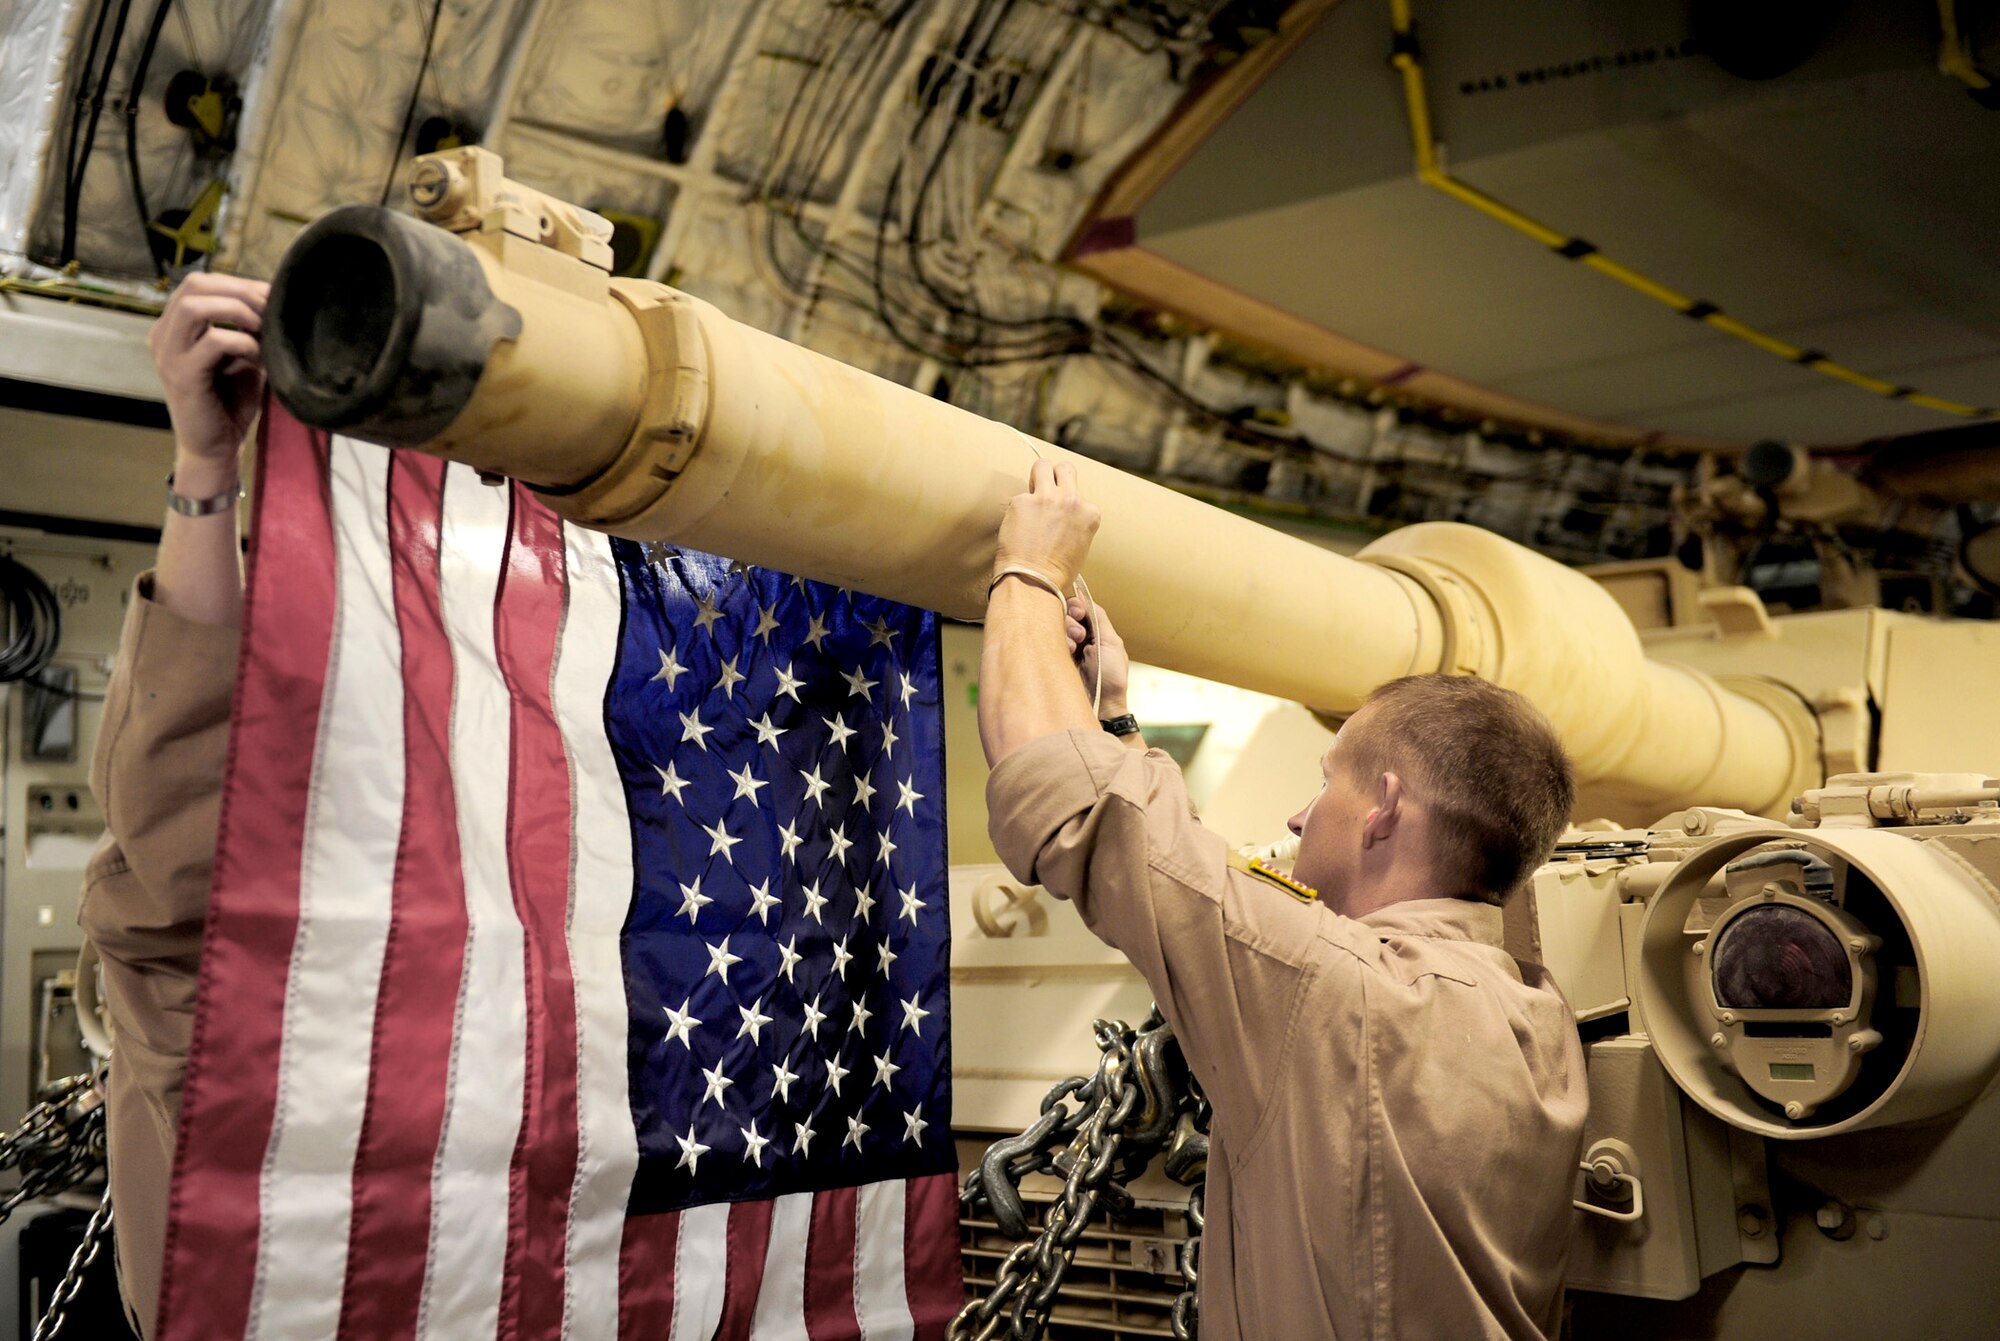 C-17 Globemaster III crewmembers tie an American flag onto a Marine Corps M1A1 Abrams tank at a base in Southwest Asia during an air transport Nov. 28, 2010, to Afghanistan in support of Operation Enduring Freedom on. The crew is assigned to the 816th Expeditionary Airlift Squadron. (U.S. Air Force Photo/Staff Sgt. Andy M. Kin)